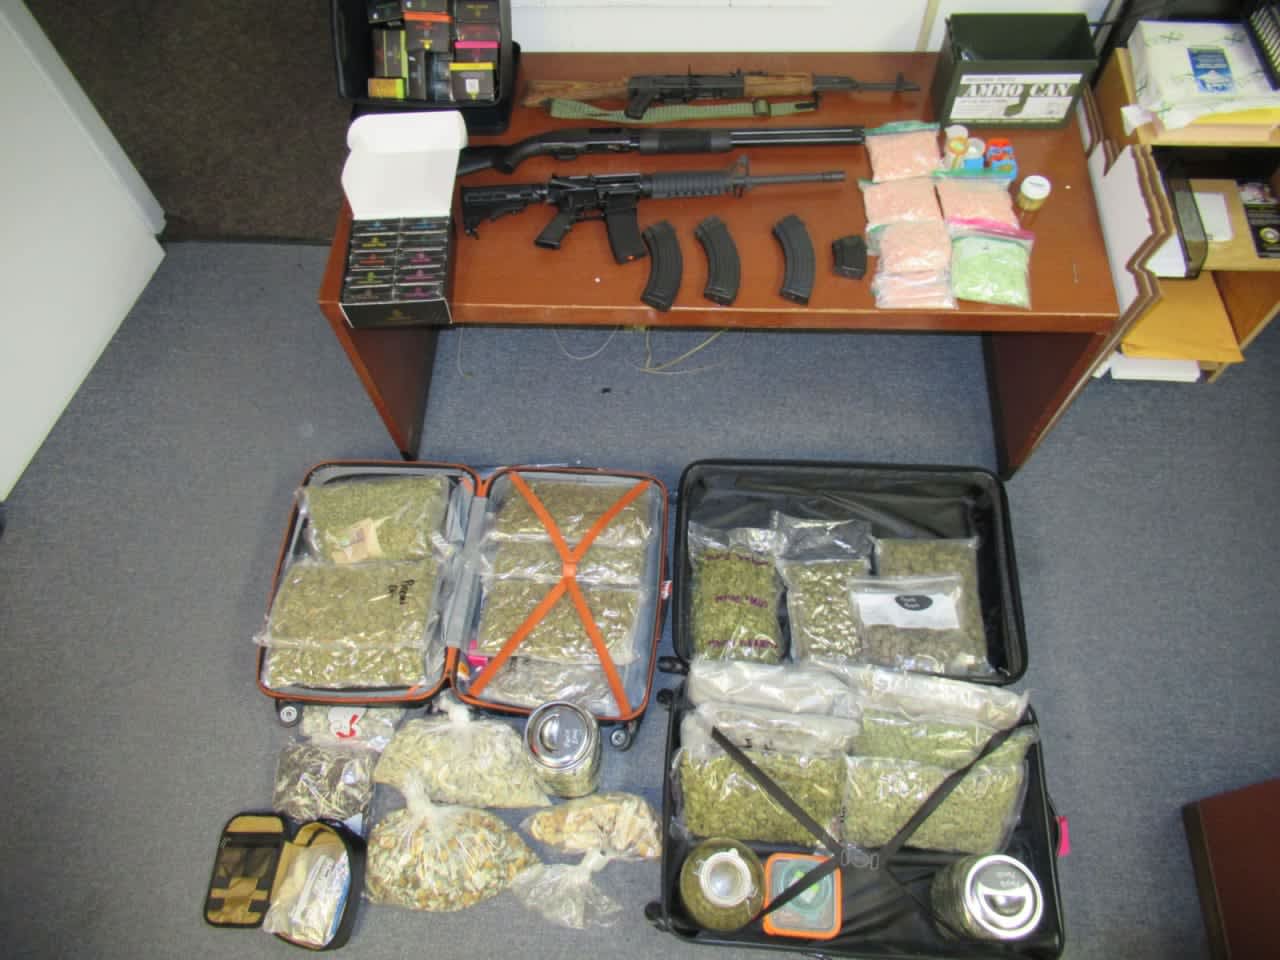 New York State Police busted a Somers man with multiple guns and a host of illegal drugs.